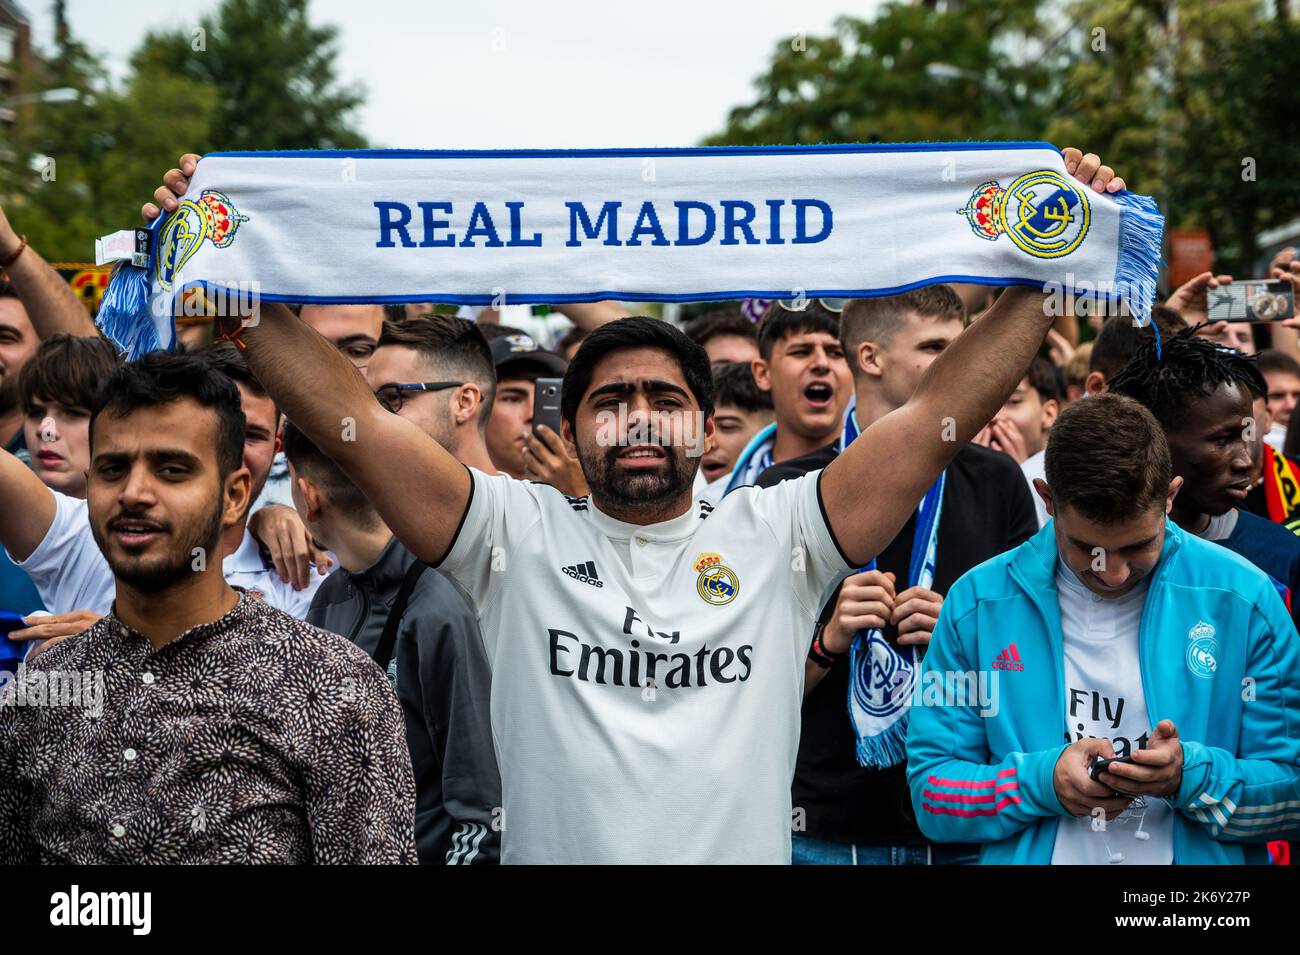 Madrid, Spain. 16th Oct, 2022. Real Madrid fans shouting slogans ahead of the derby match 'El Clasico' in the Santiago Bernabeu Stadium between Real Madrid and F.C. Barcelona teams. Credit: Marcos del Mazo/Alamy Live News Stock Photo